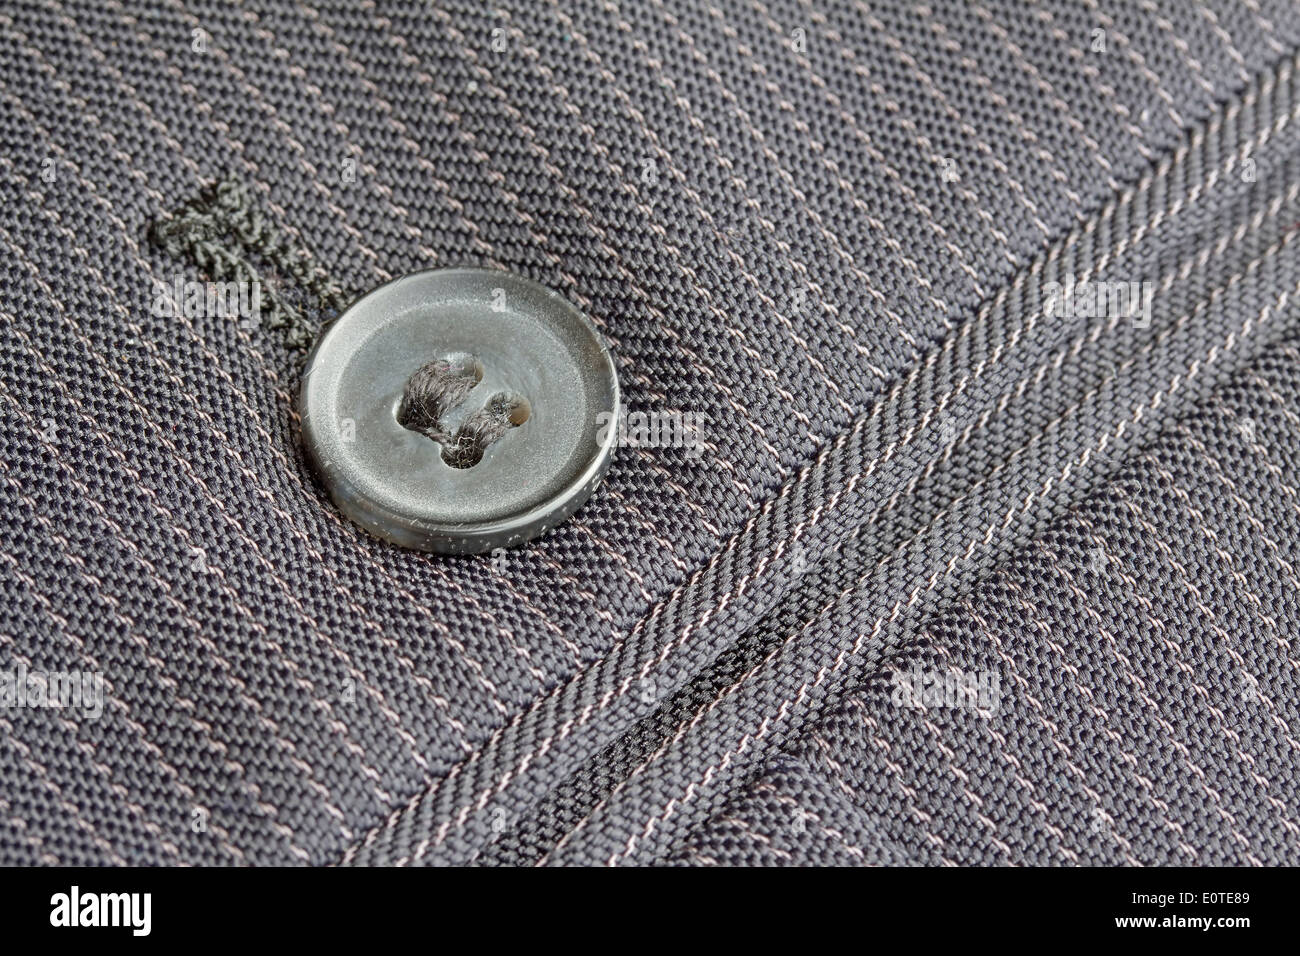 Close up pocket button on formal suit trousers Stock Photo